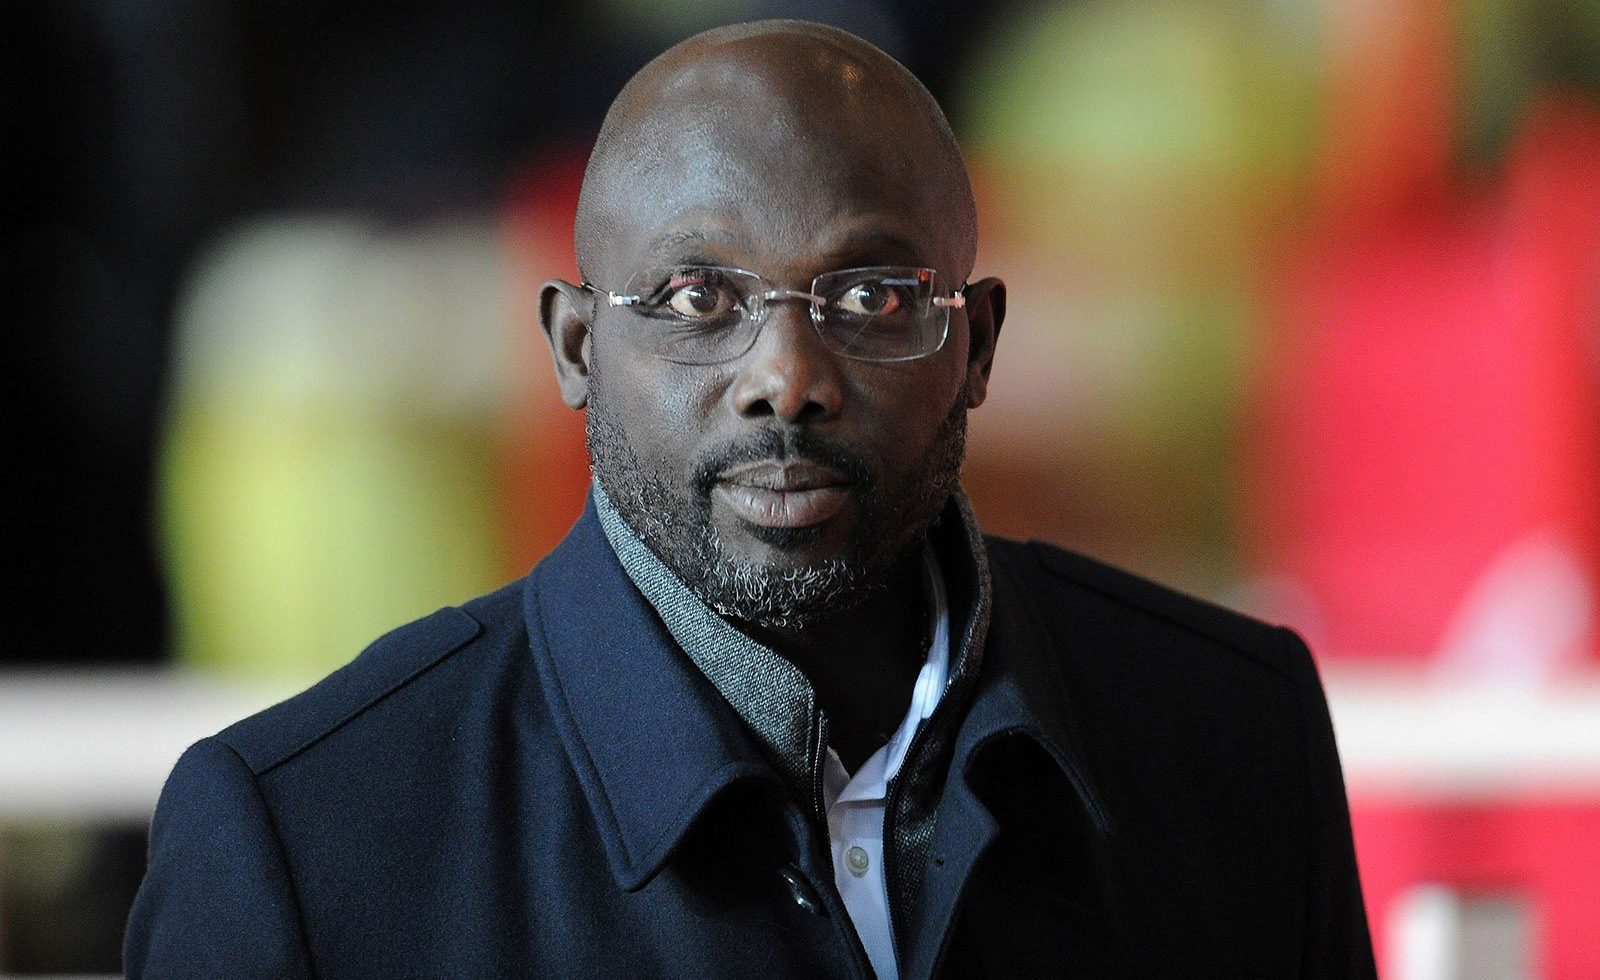 Weah Pledges Free, Credible Poll at UN General Assembly